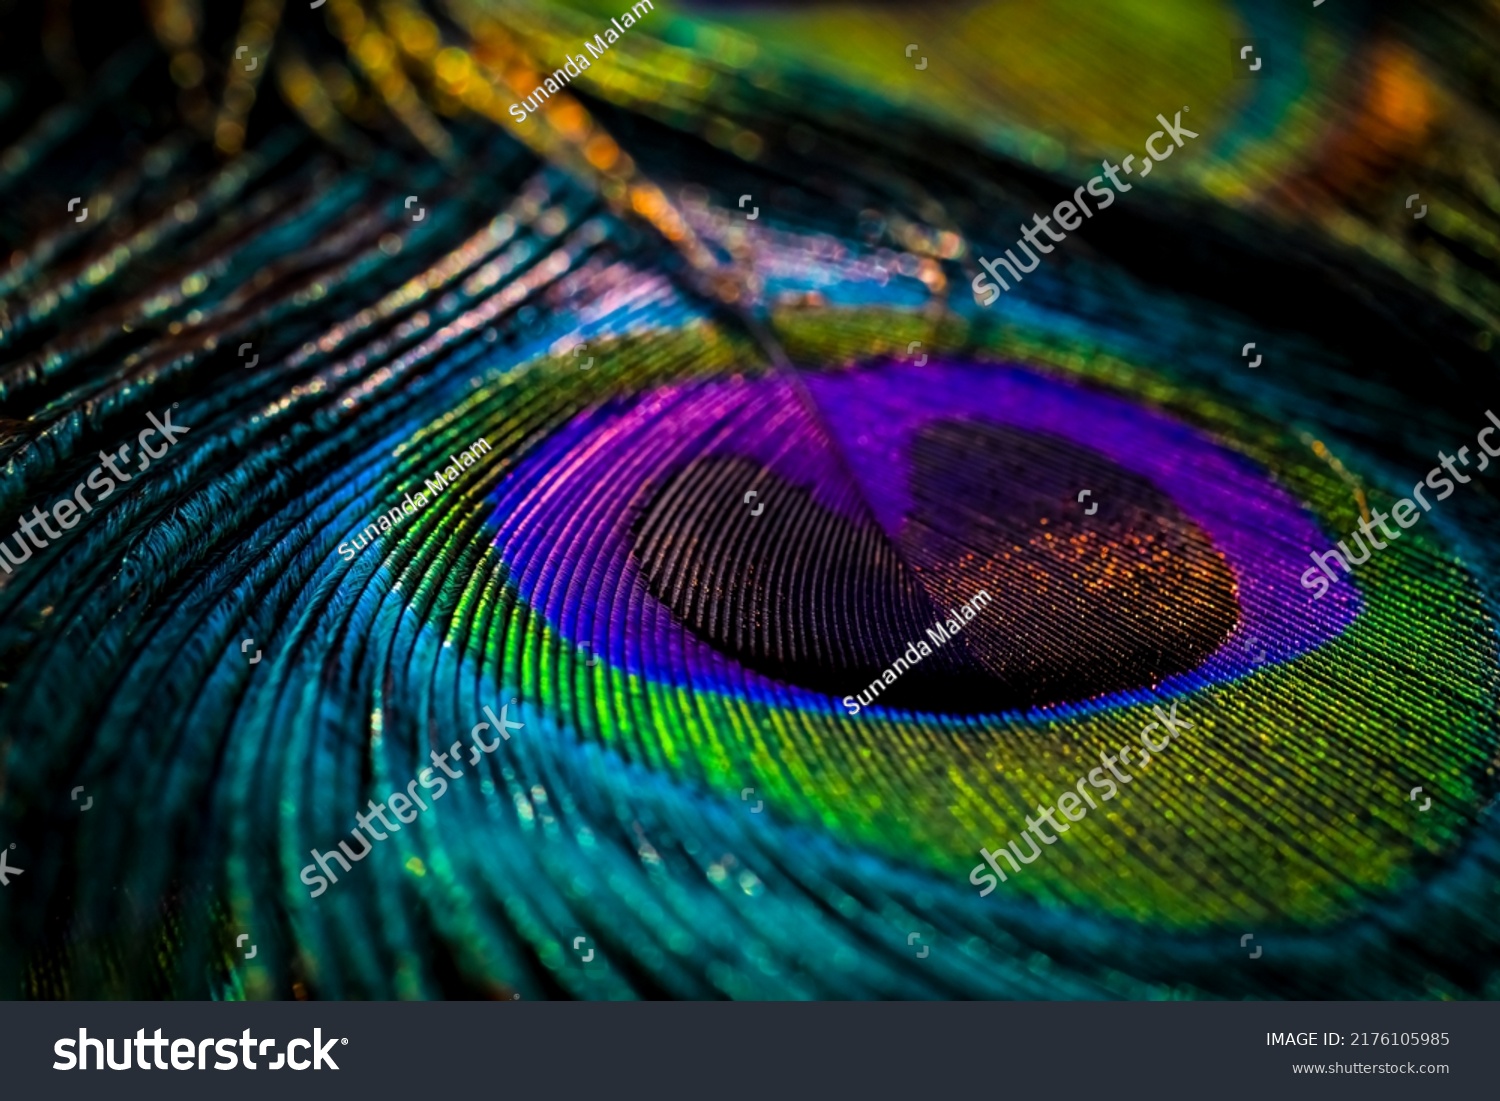 India, 26 February, 2021 : Peacock feather, Peafowl feather, Bird feather, Colorful feather, Background, textured, natural background, Macro photography, Closeup, Beautiful background, colors. #2176105985